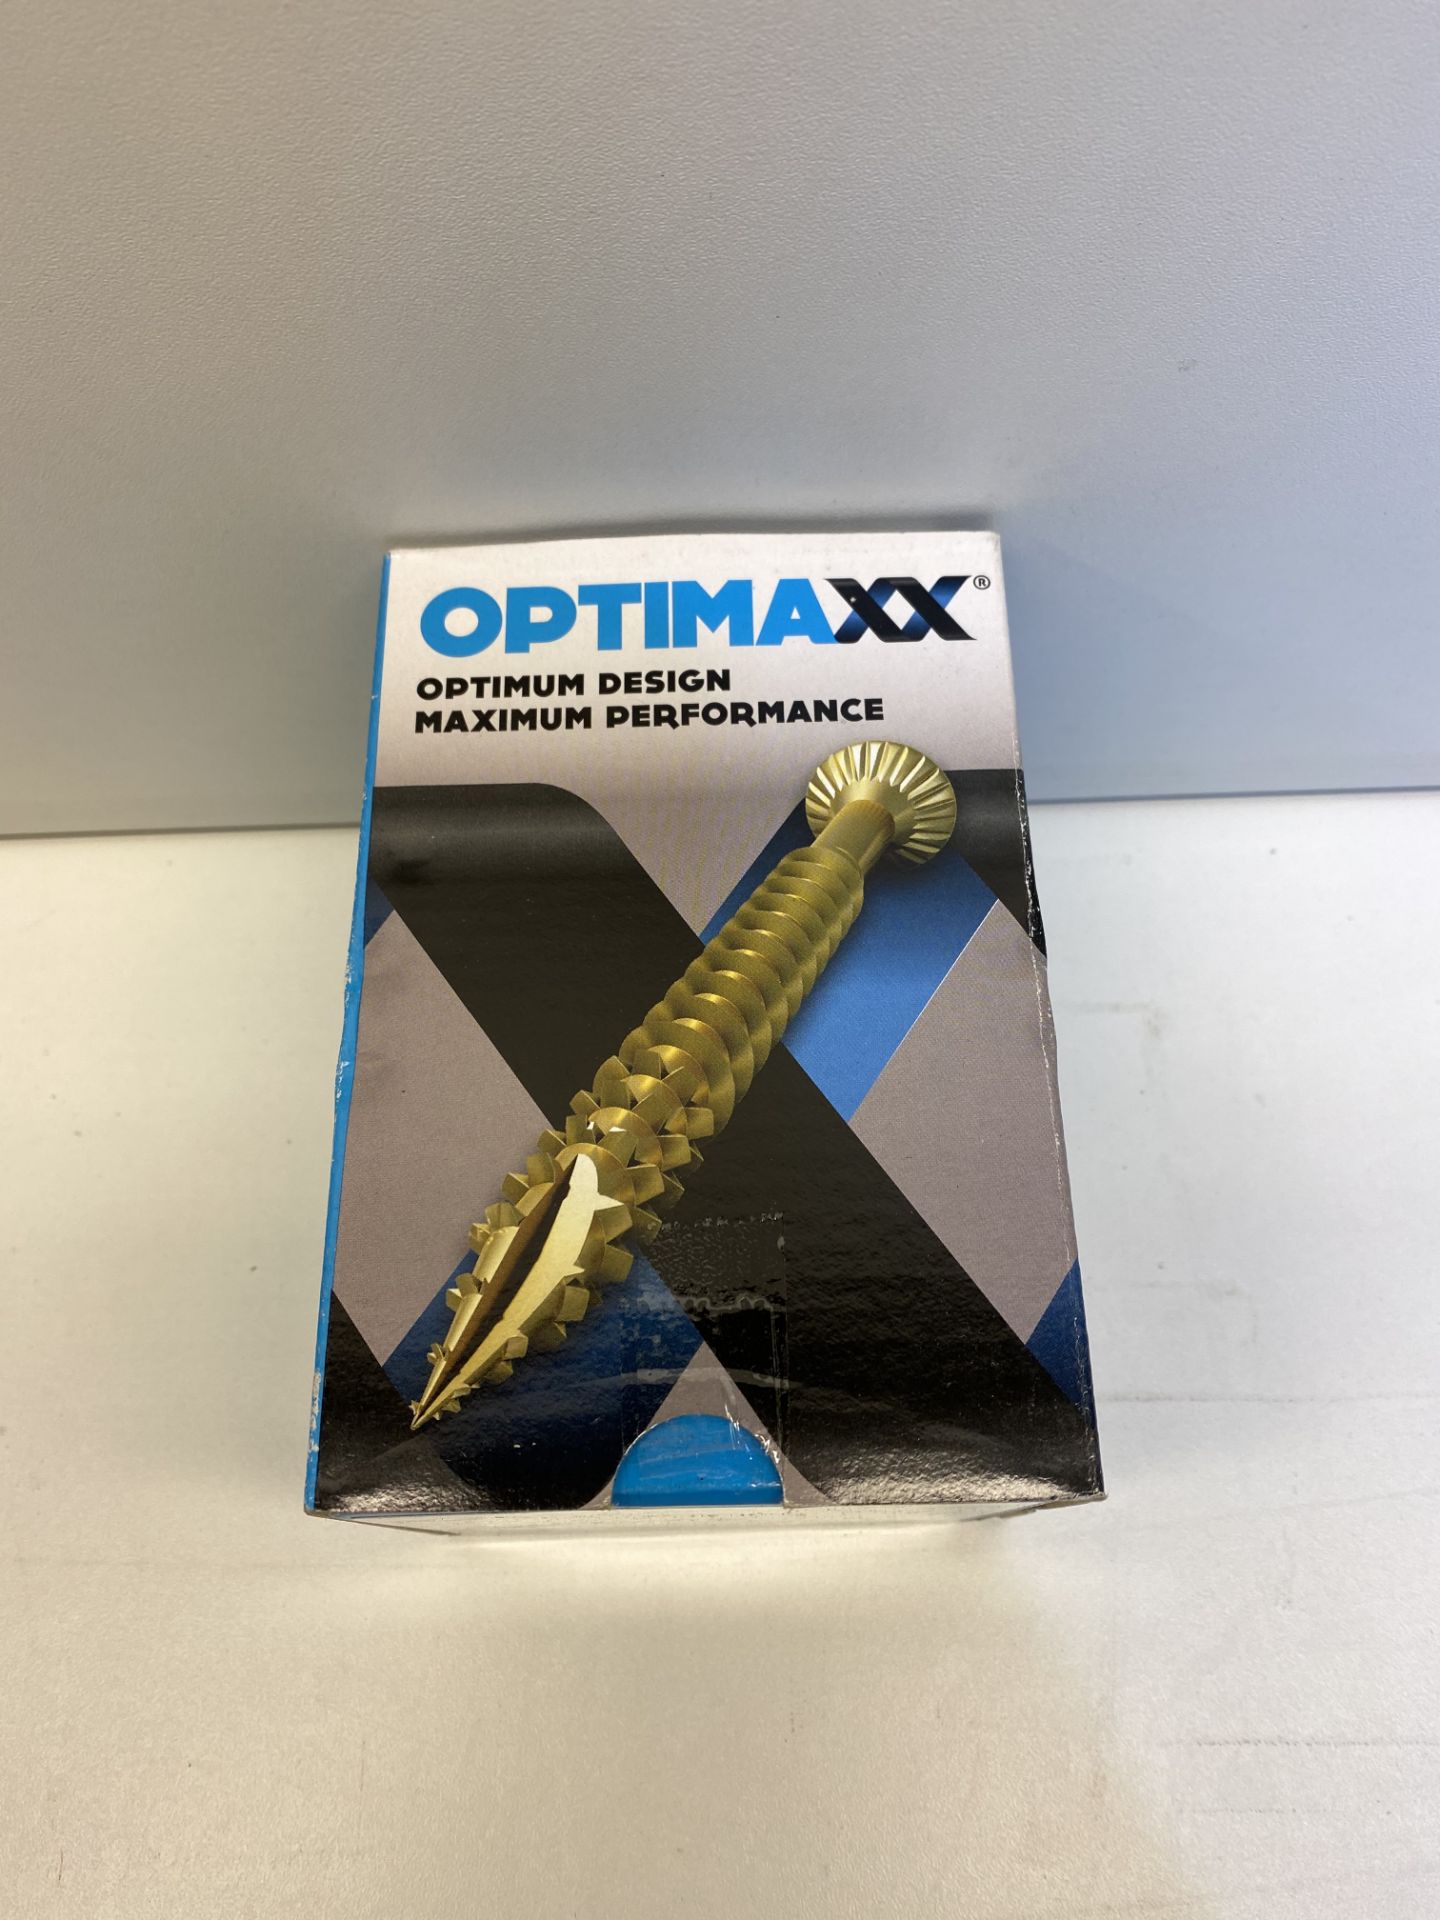 Optimaxx Wood Screw Selection in Case + Tape Measure - Image 3 of 12